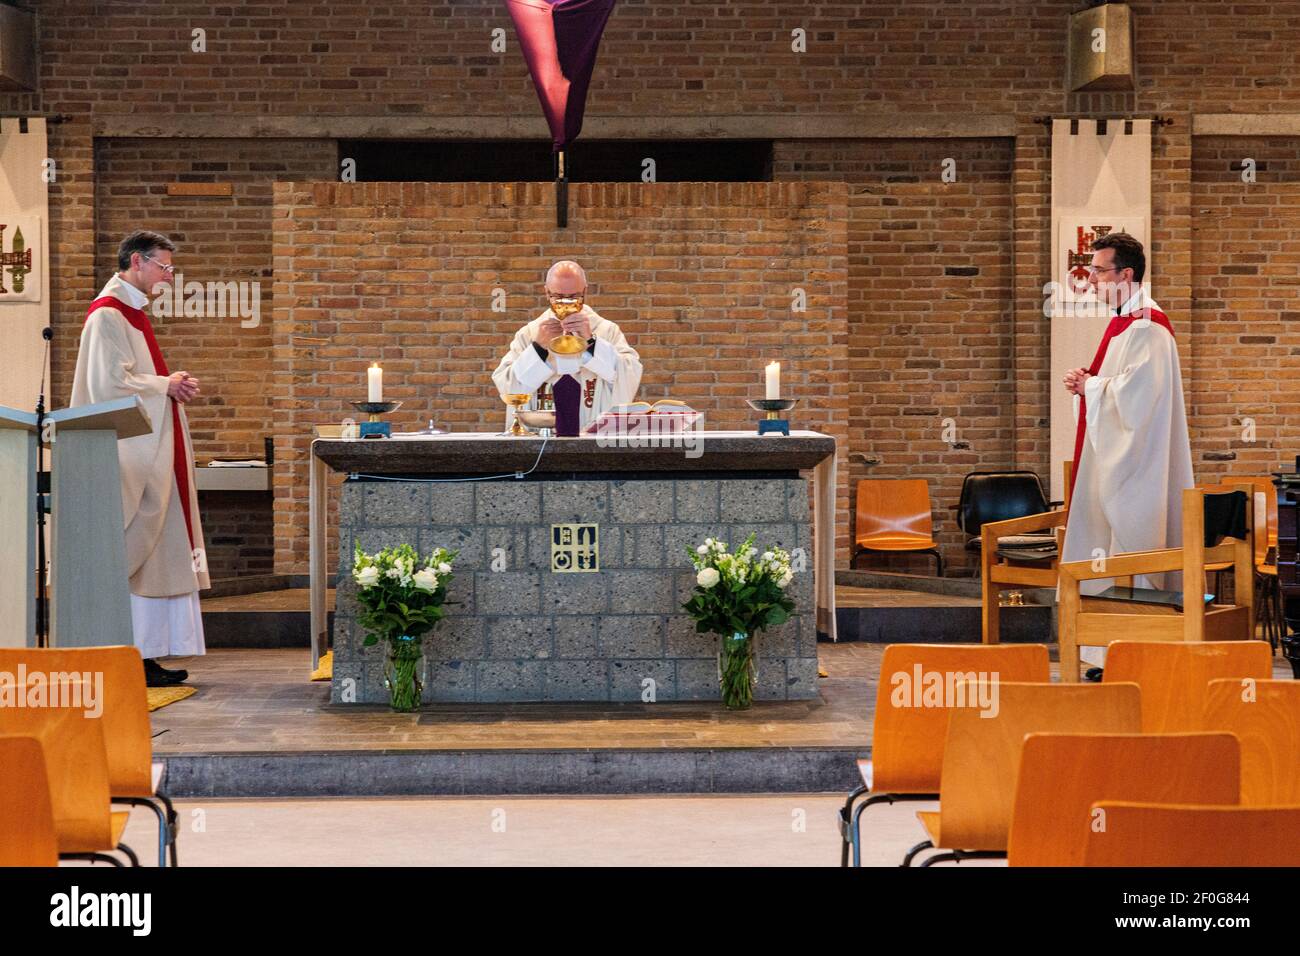 Tilburg, Netherlands. Due to Corona Crisis, Eastern Masses in Catholic Churches are performed without any audience. Christians can follow and participate proceedigs thanks to licestream over the Internet. Stock Photo